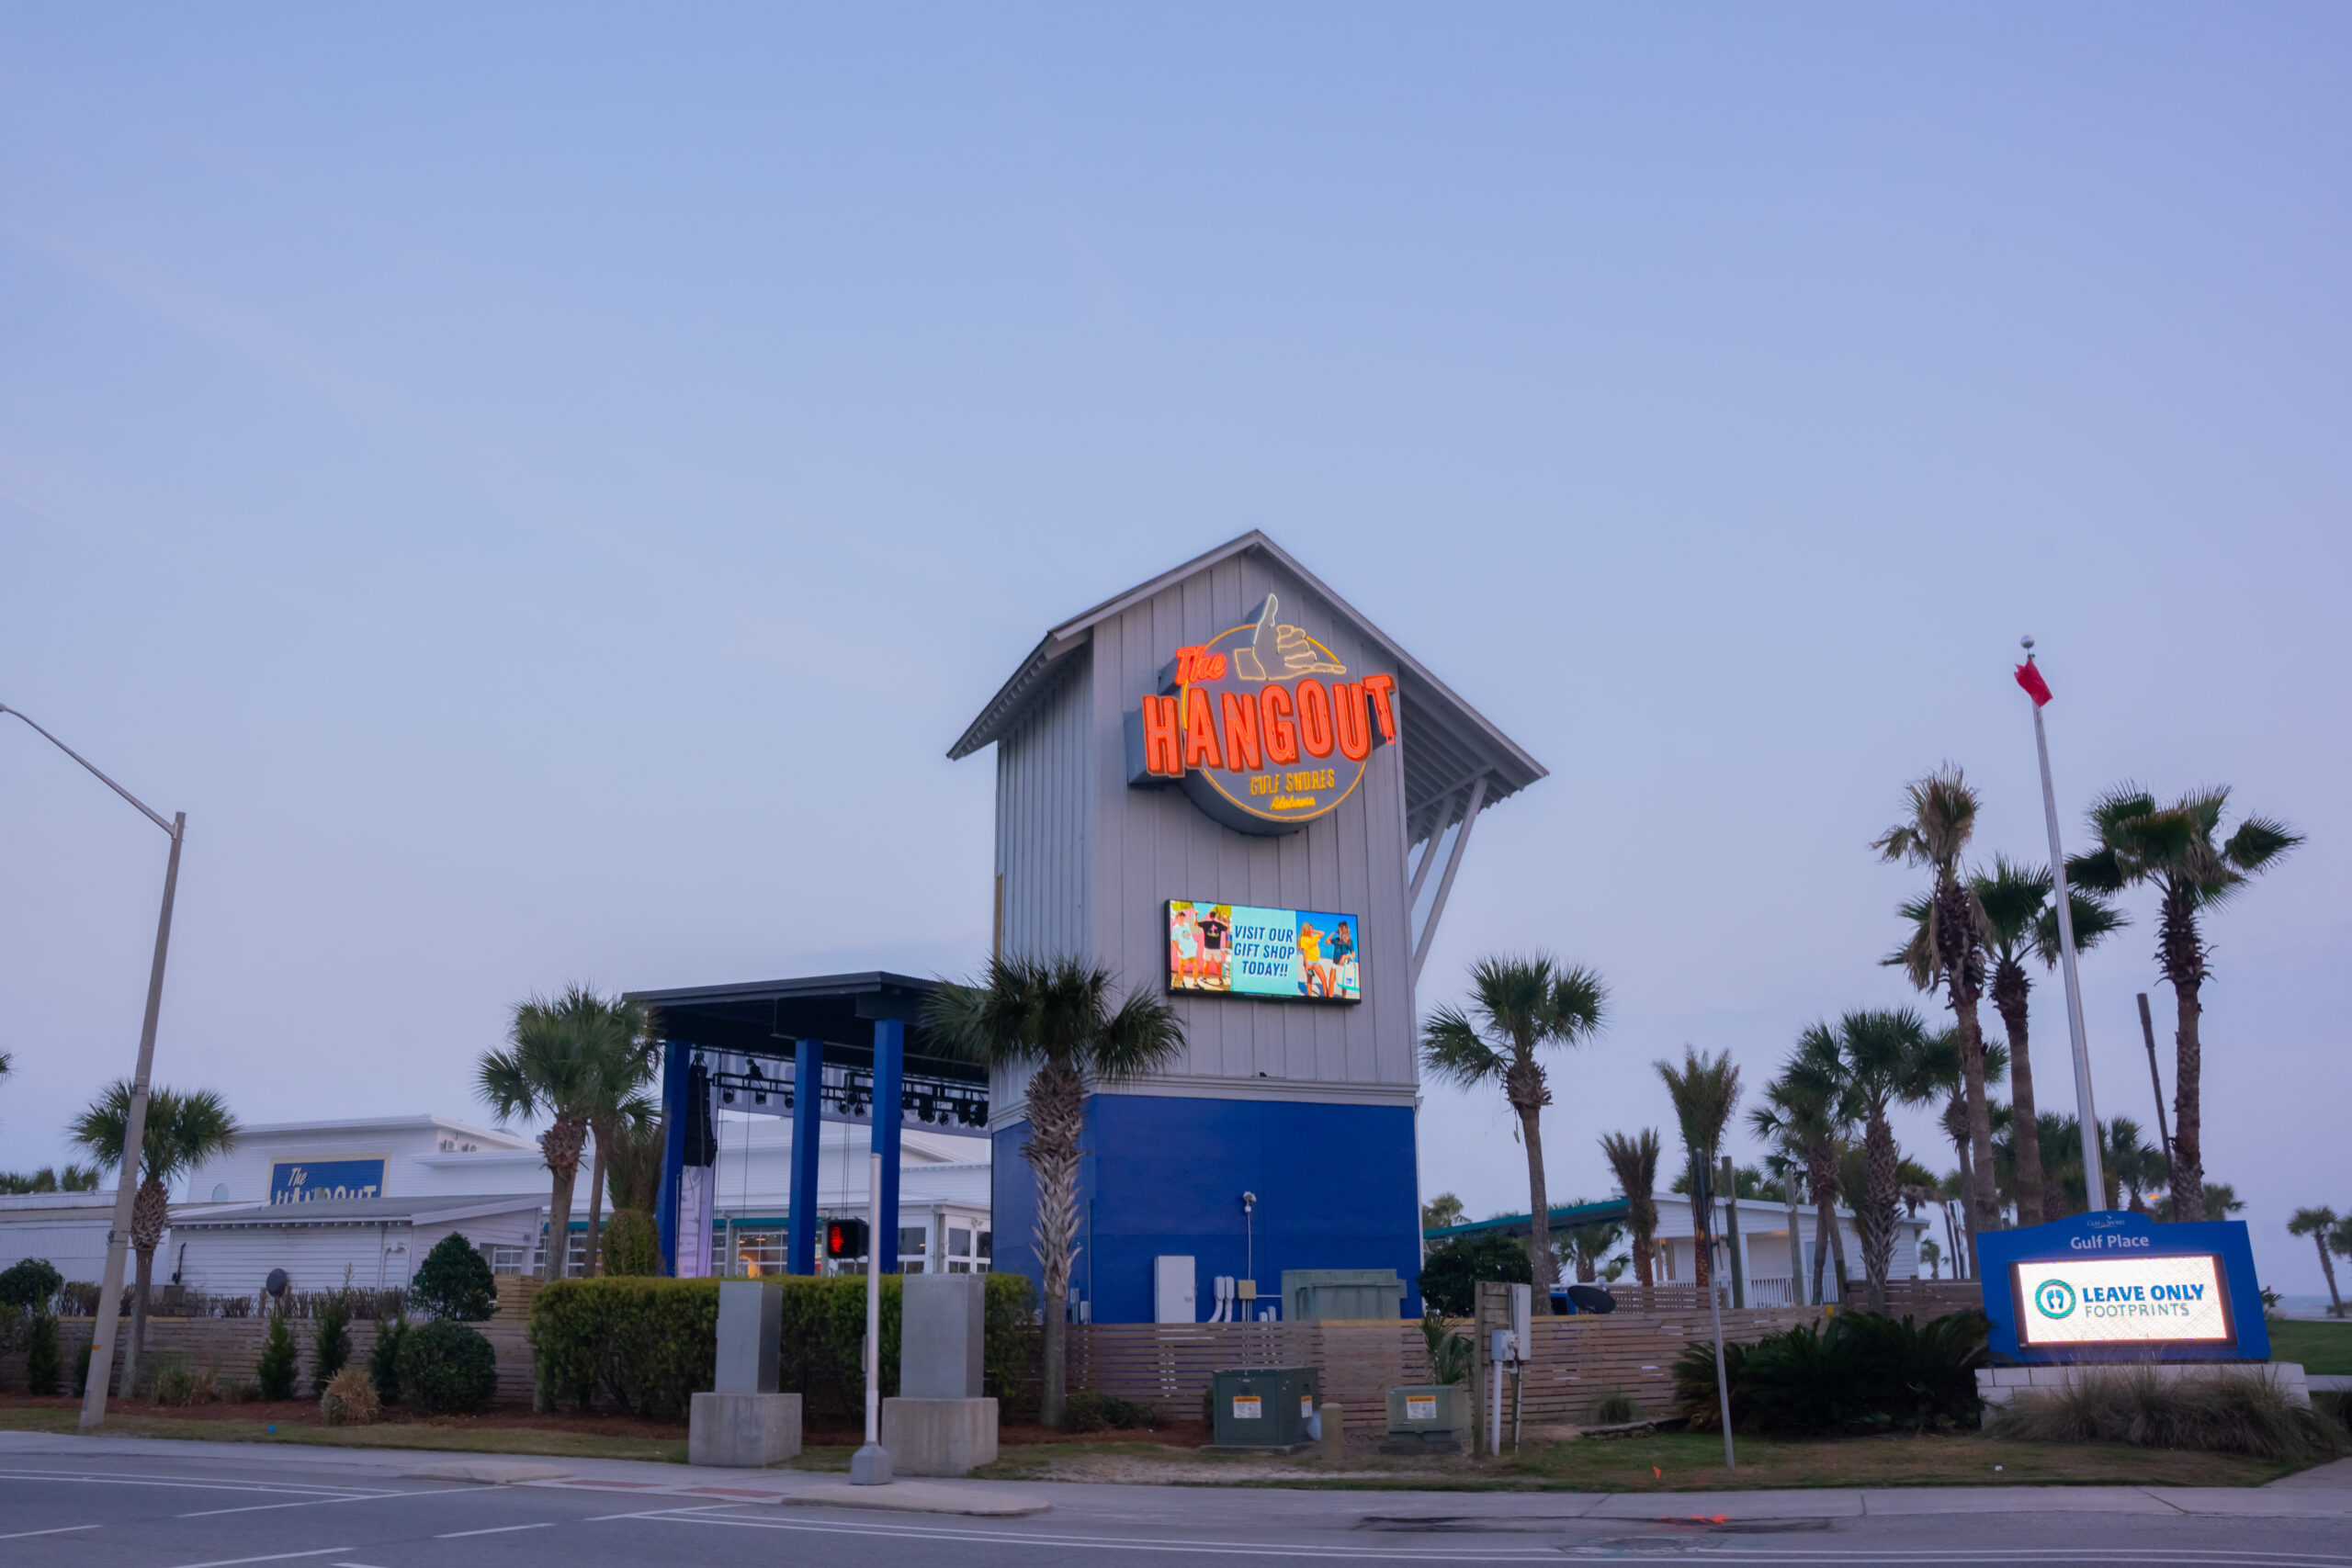 Don’t Miss The Hangout In Gulf Shores